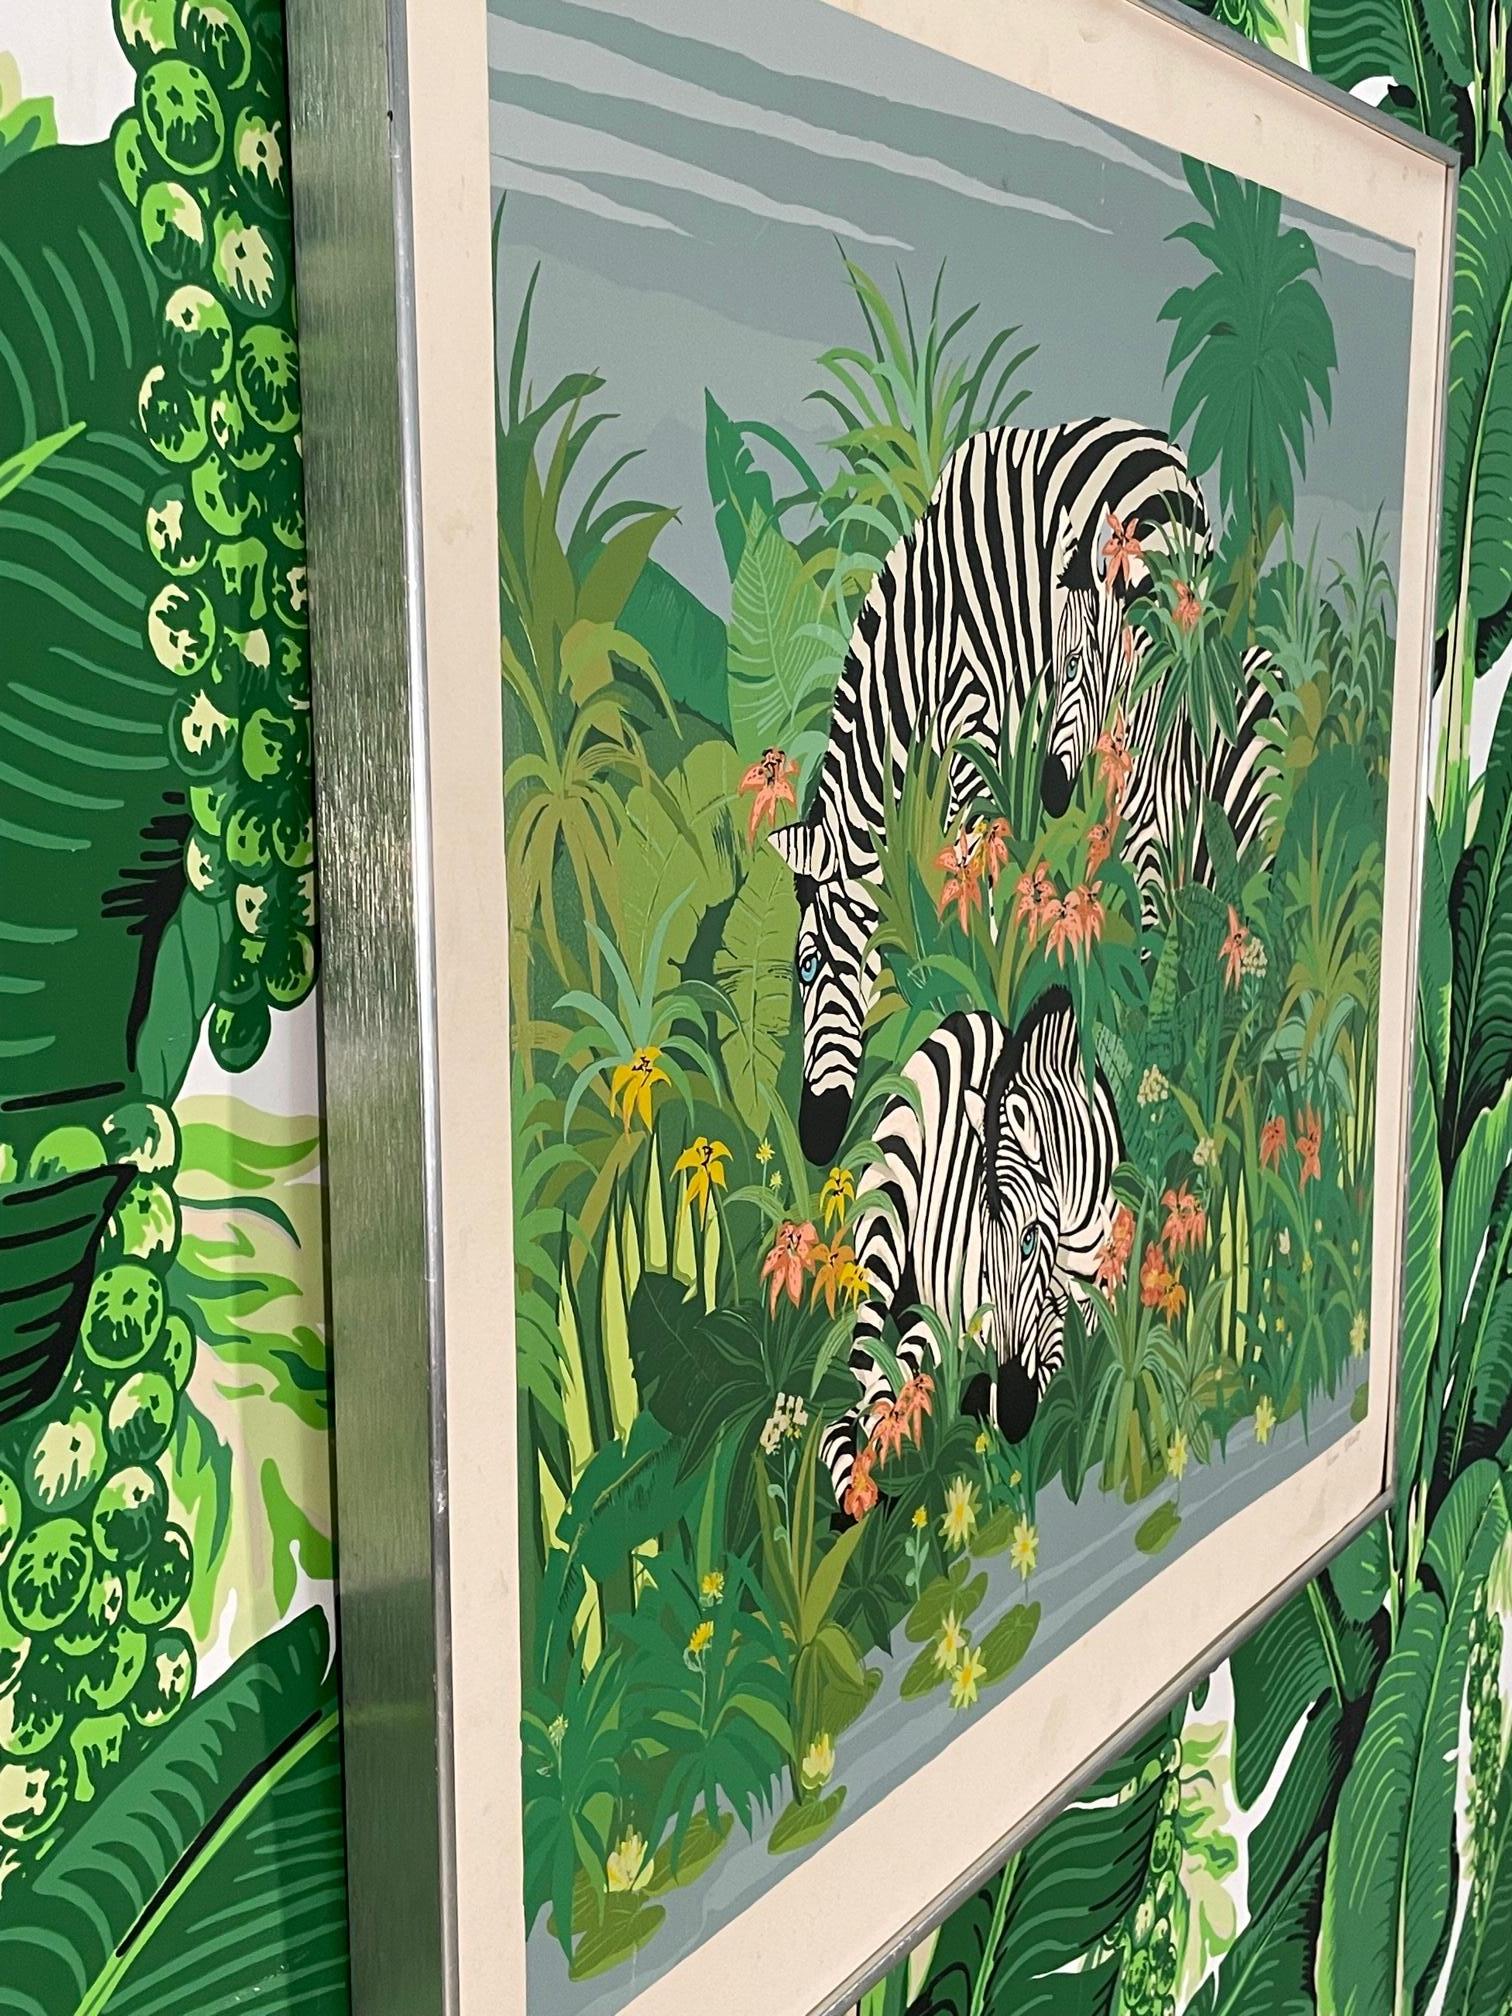 Colorful Zebra and Floral Print in Chrome Frame In Good Condition For Sale In Jacksonville, FL